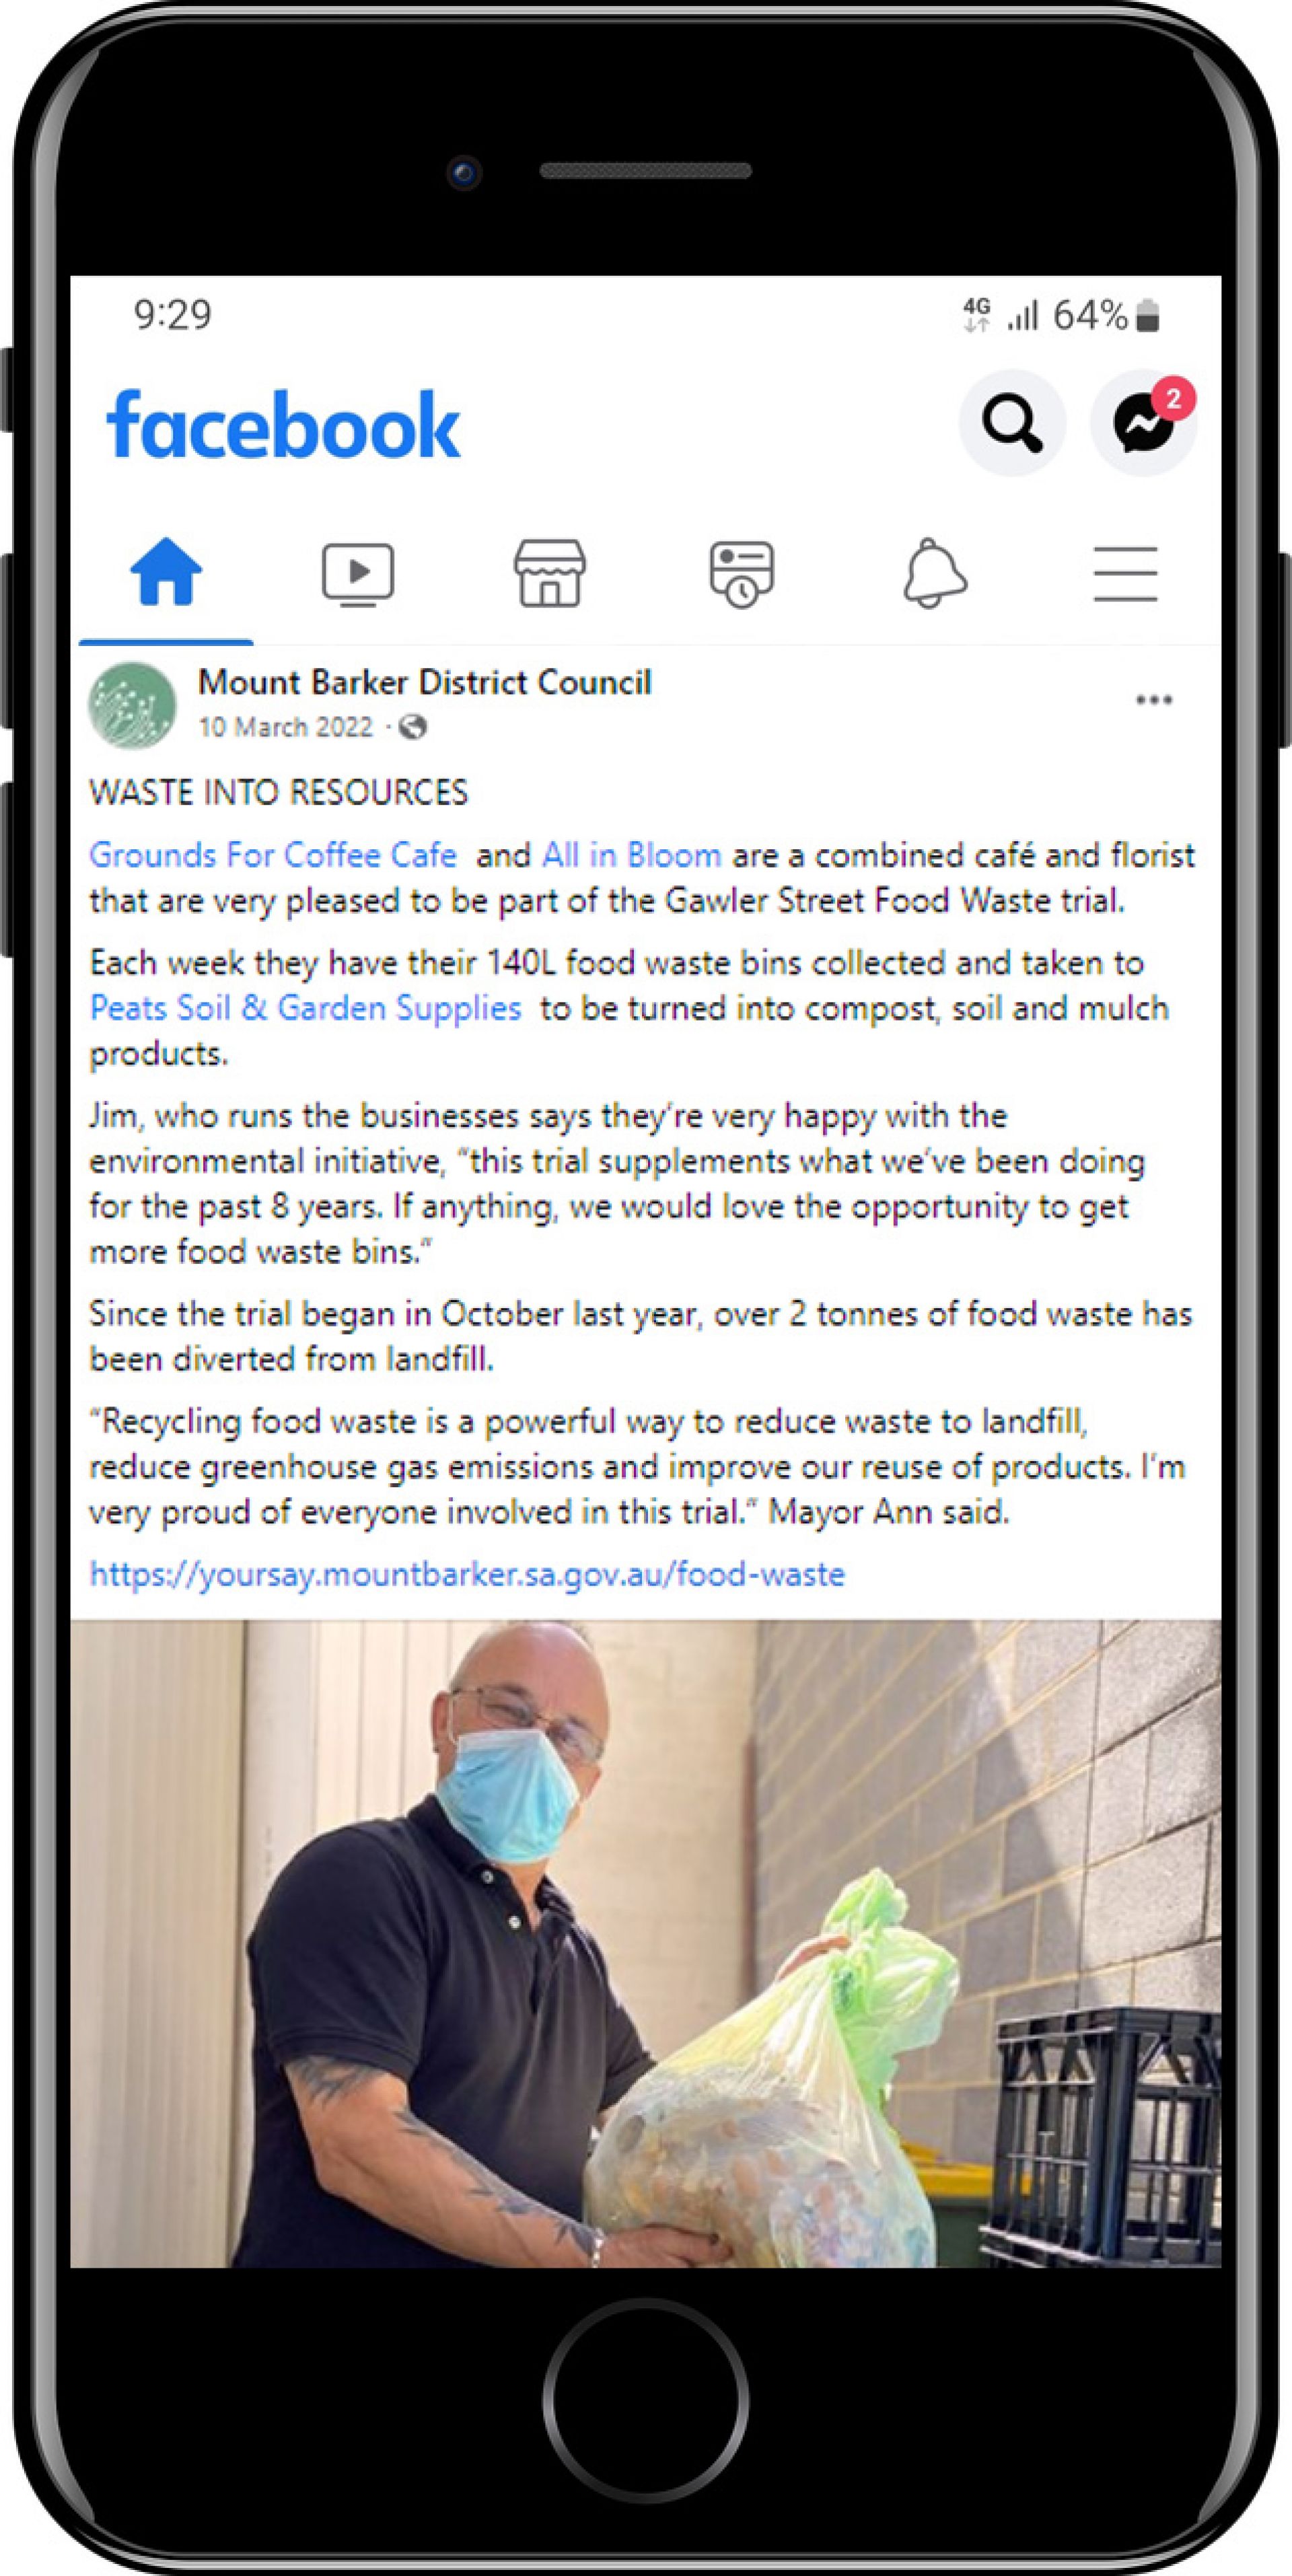 Facebook - Gawler St Food Waste Grounds for Coffee and All in Bloom